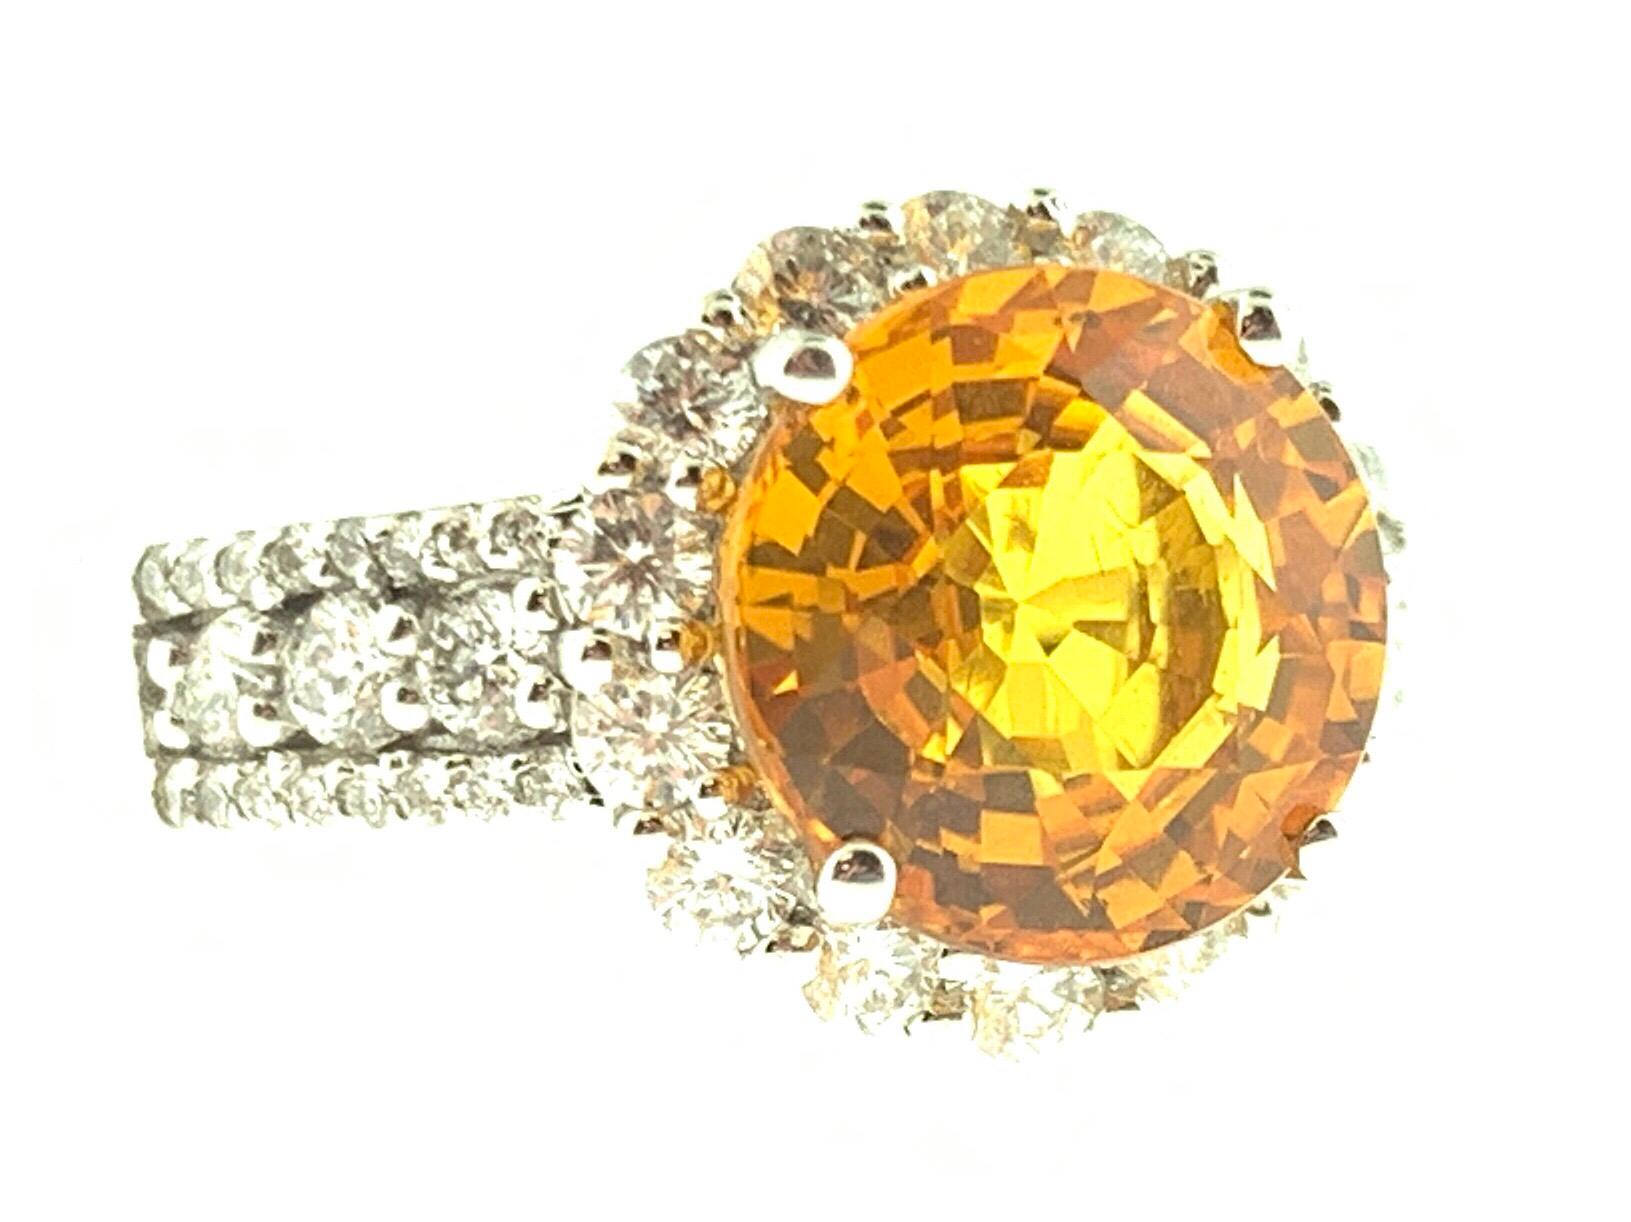 This stunning cocktail ring features a beautiful 4.08 Carat Round Yellow Sapphire with a Diamond Halo. The Sapphire sits on a Diamond Shank and is set in 18k White Gold. Total Diamond Weight = 0.86 Carats. Ring Size is 6 1/4.